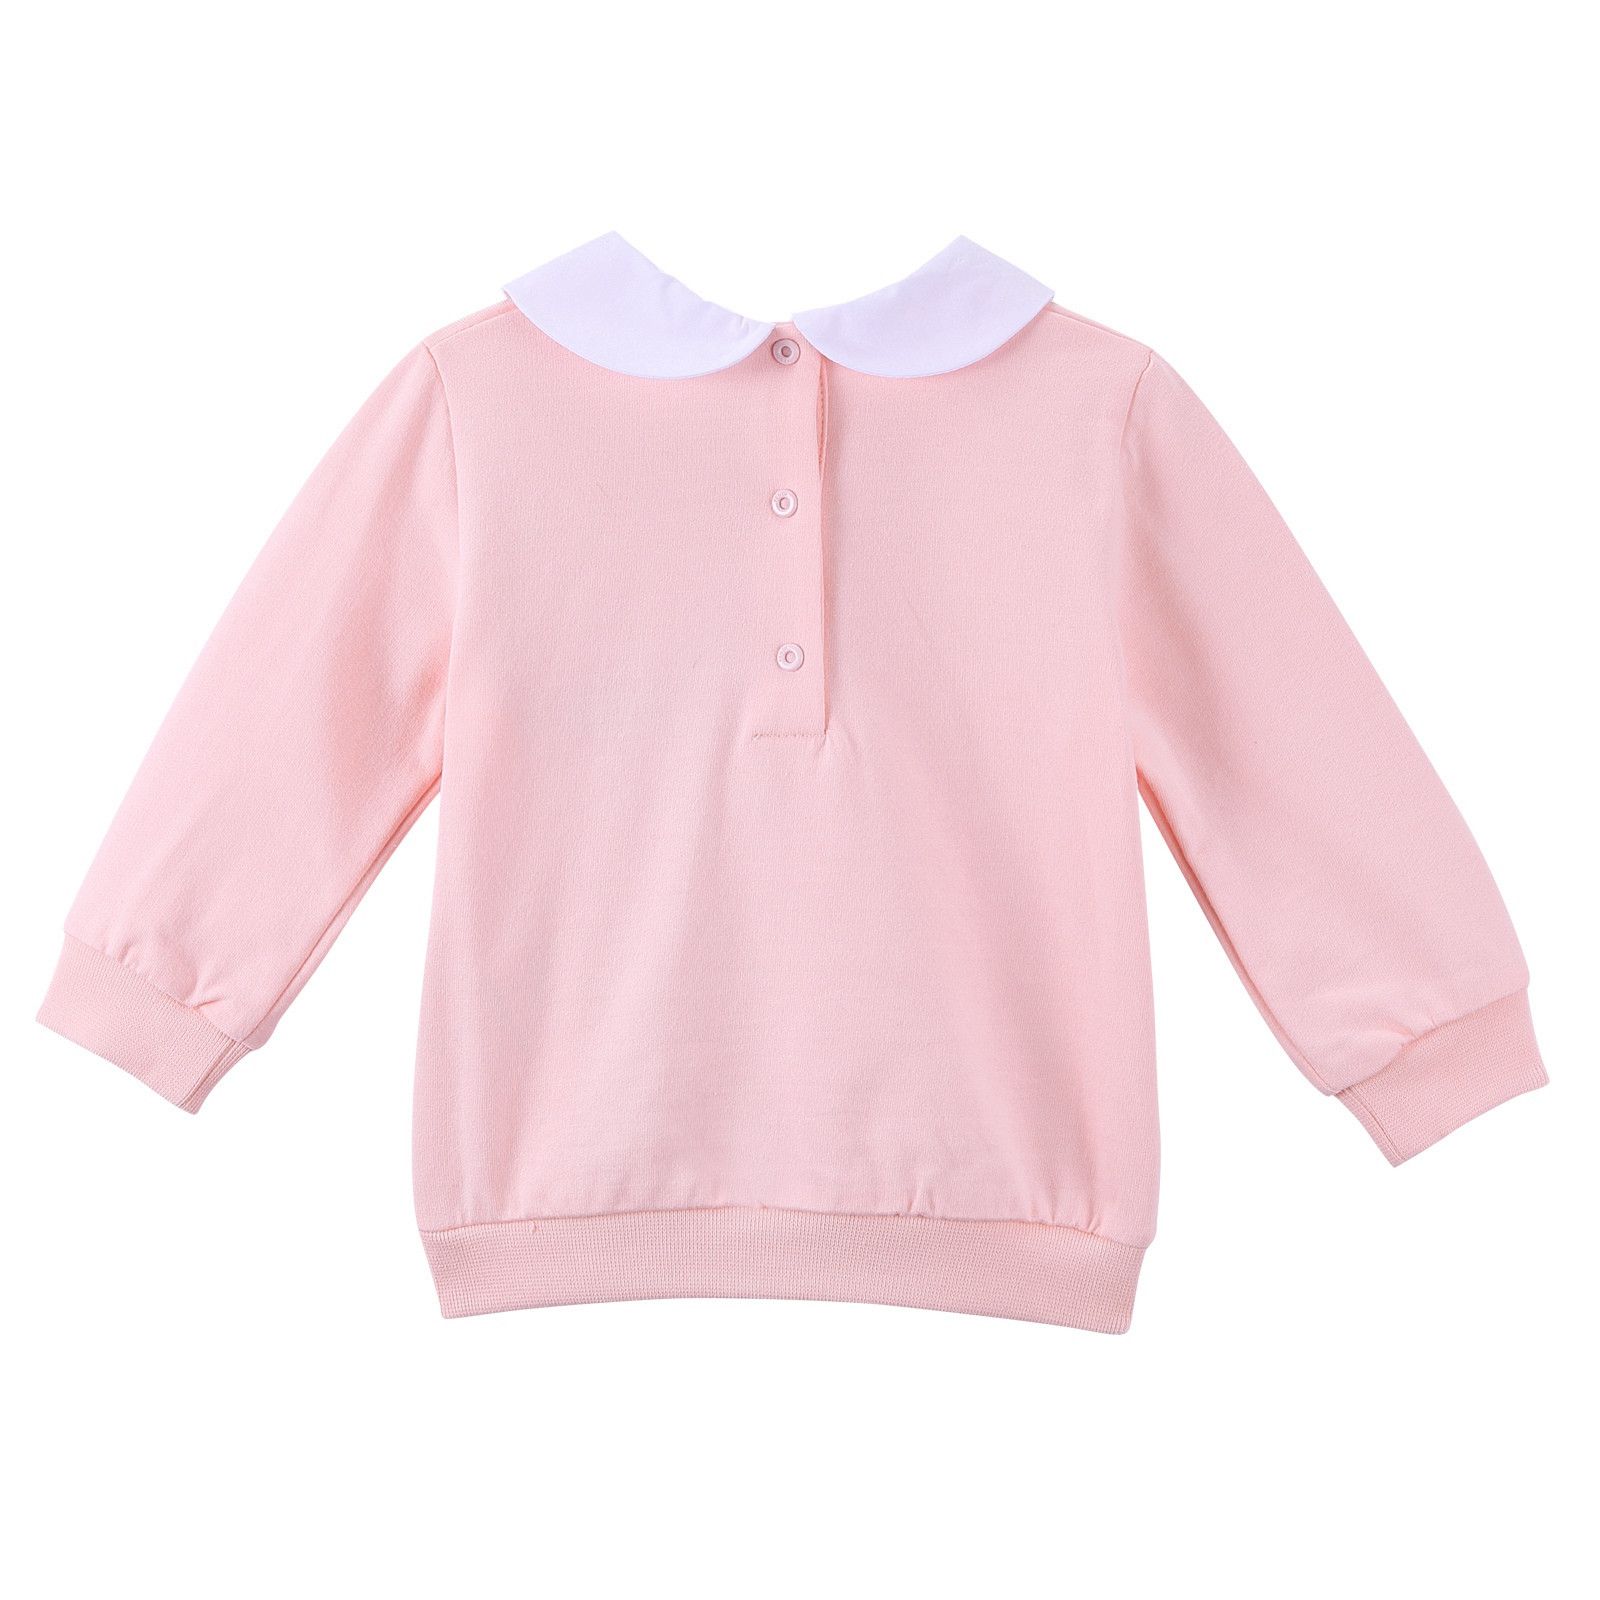 Baby Girls Pink Embroidered Trims Sweatshirt With Peter Pan Collar - CÉMAROSE | Children's Fashion Store - 2